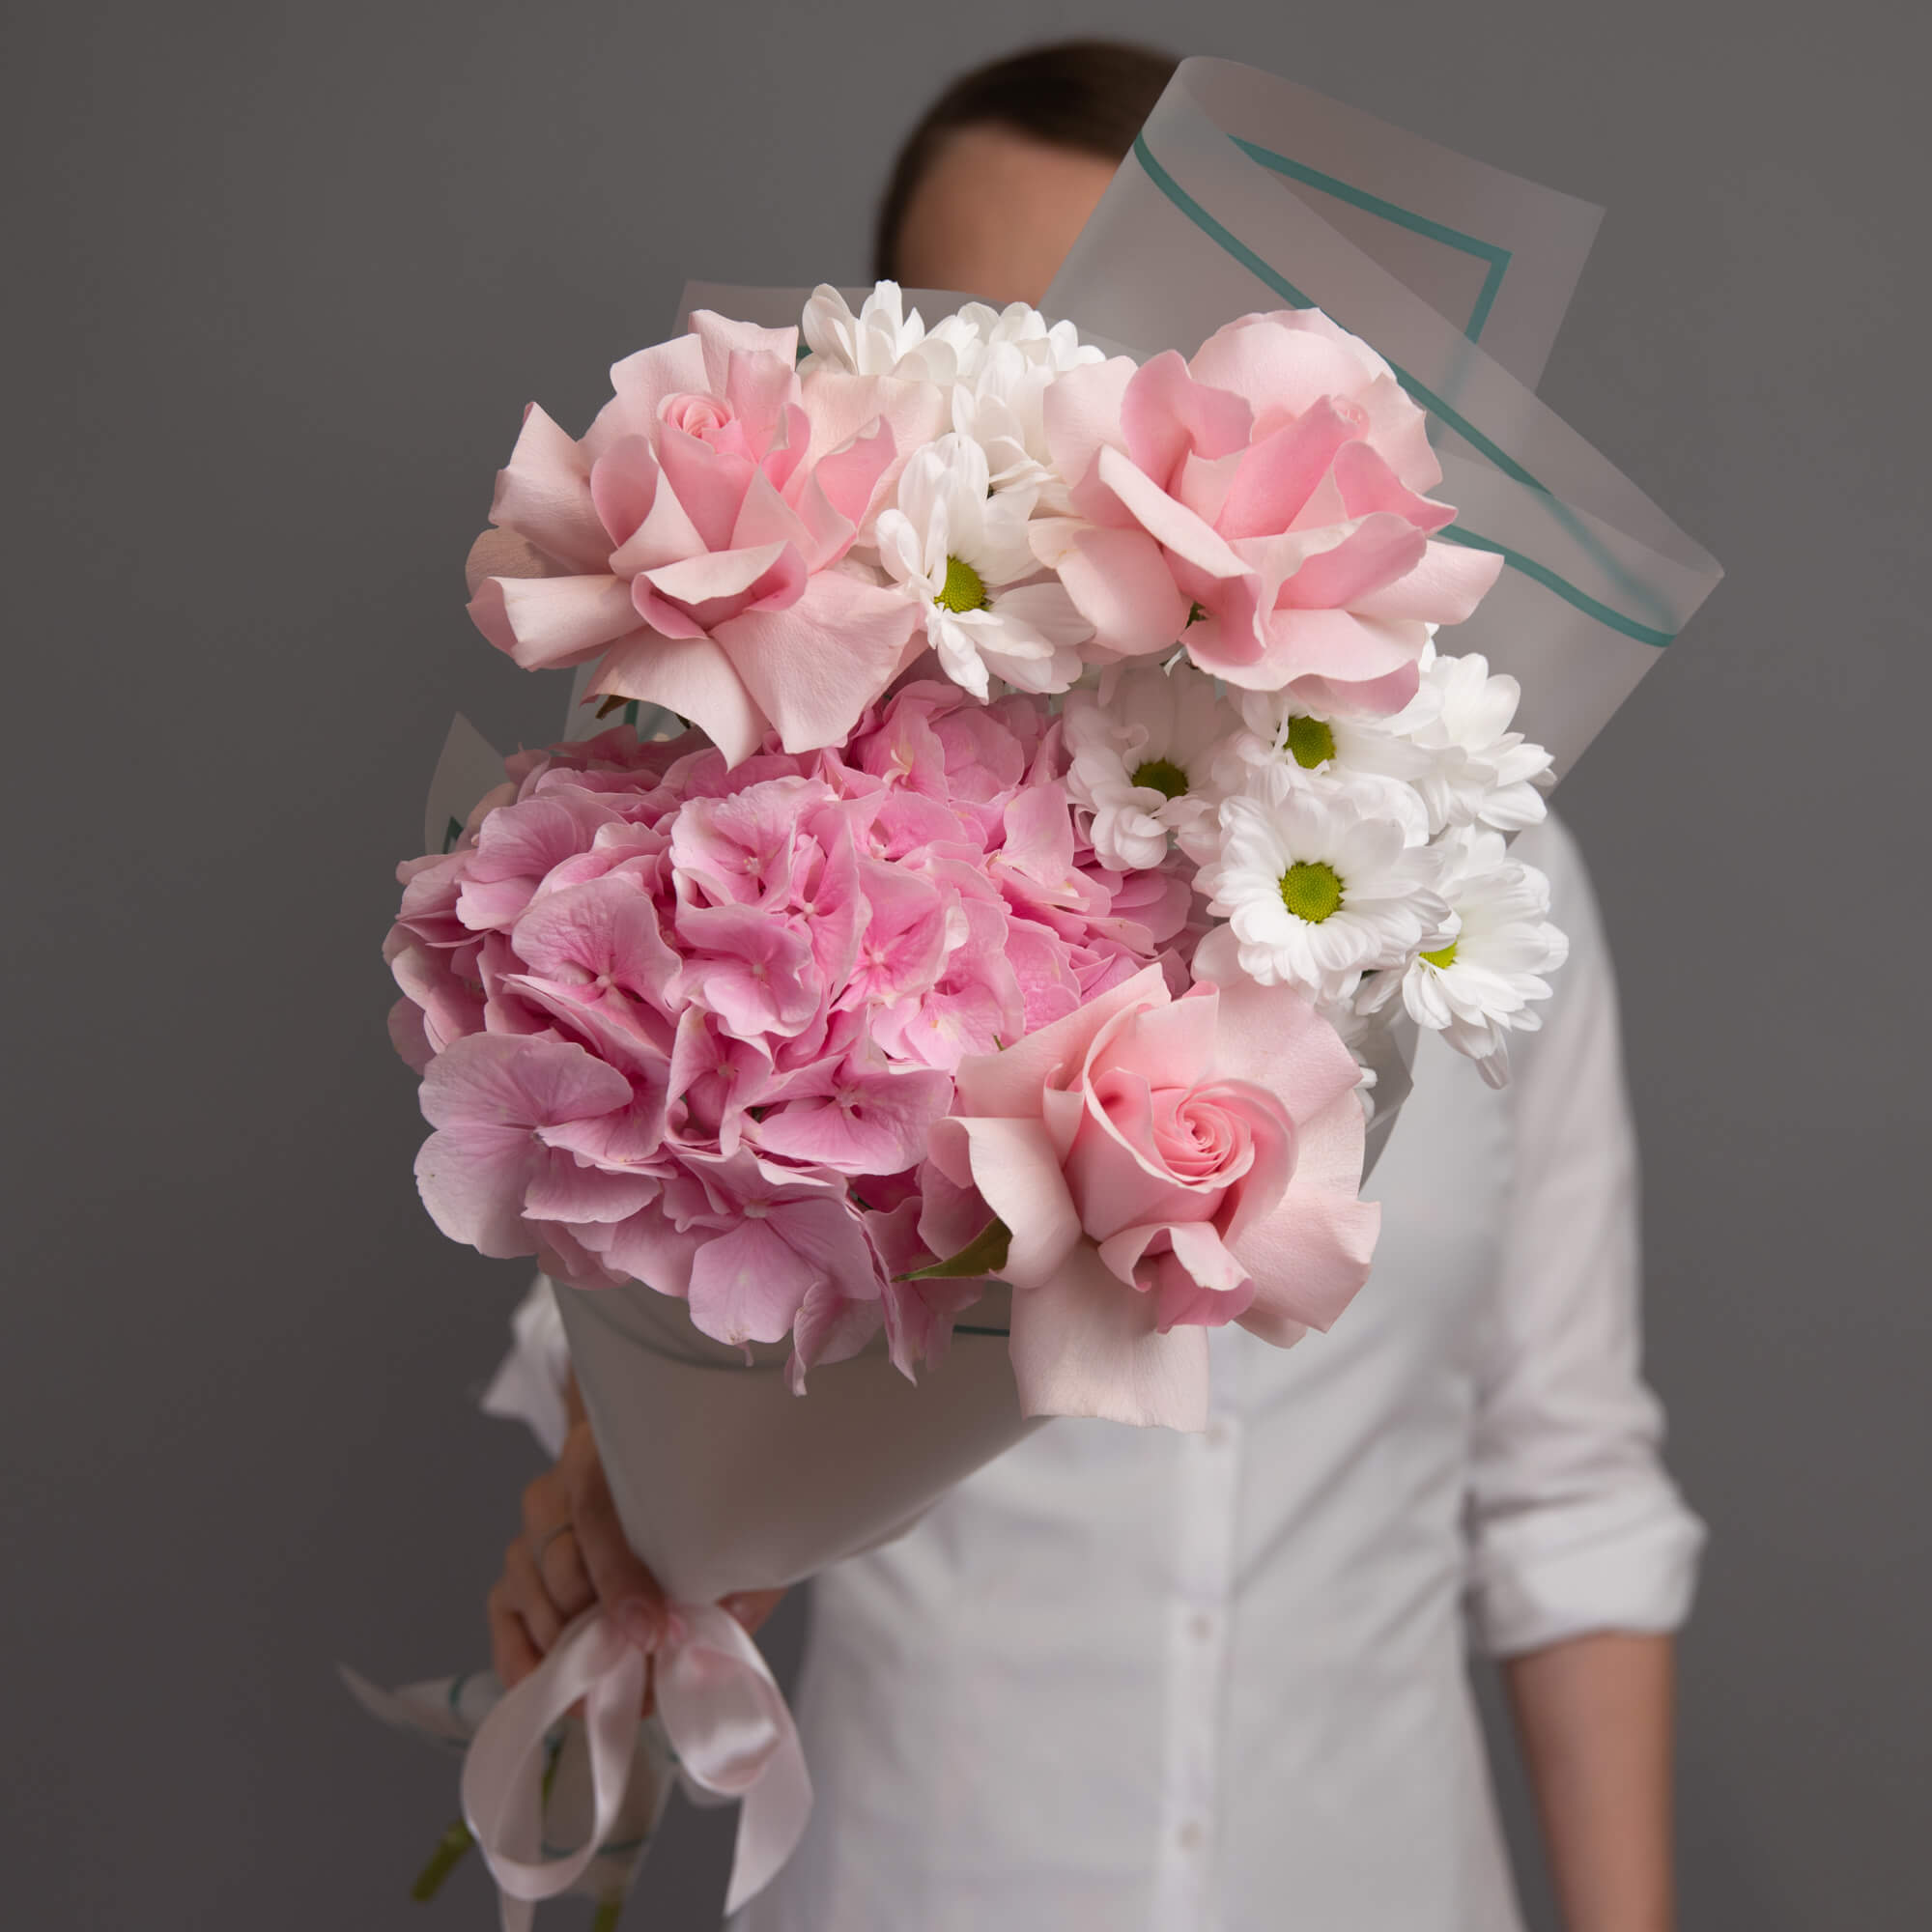 Bouquet with pink roses and chrysanthemums